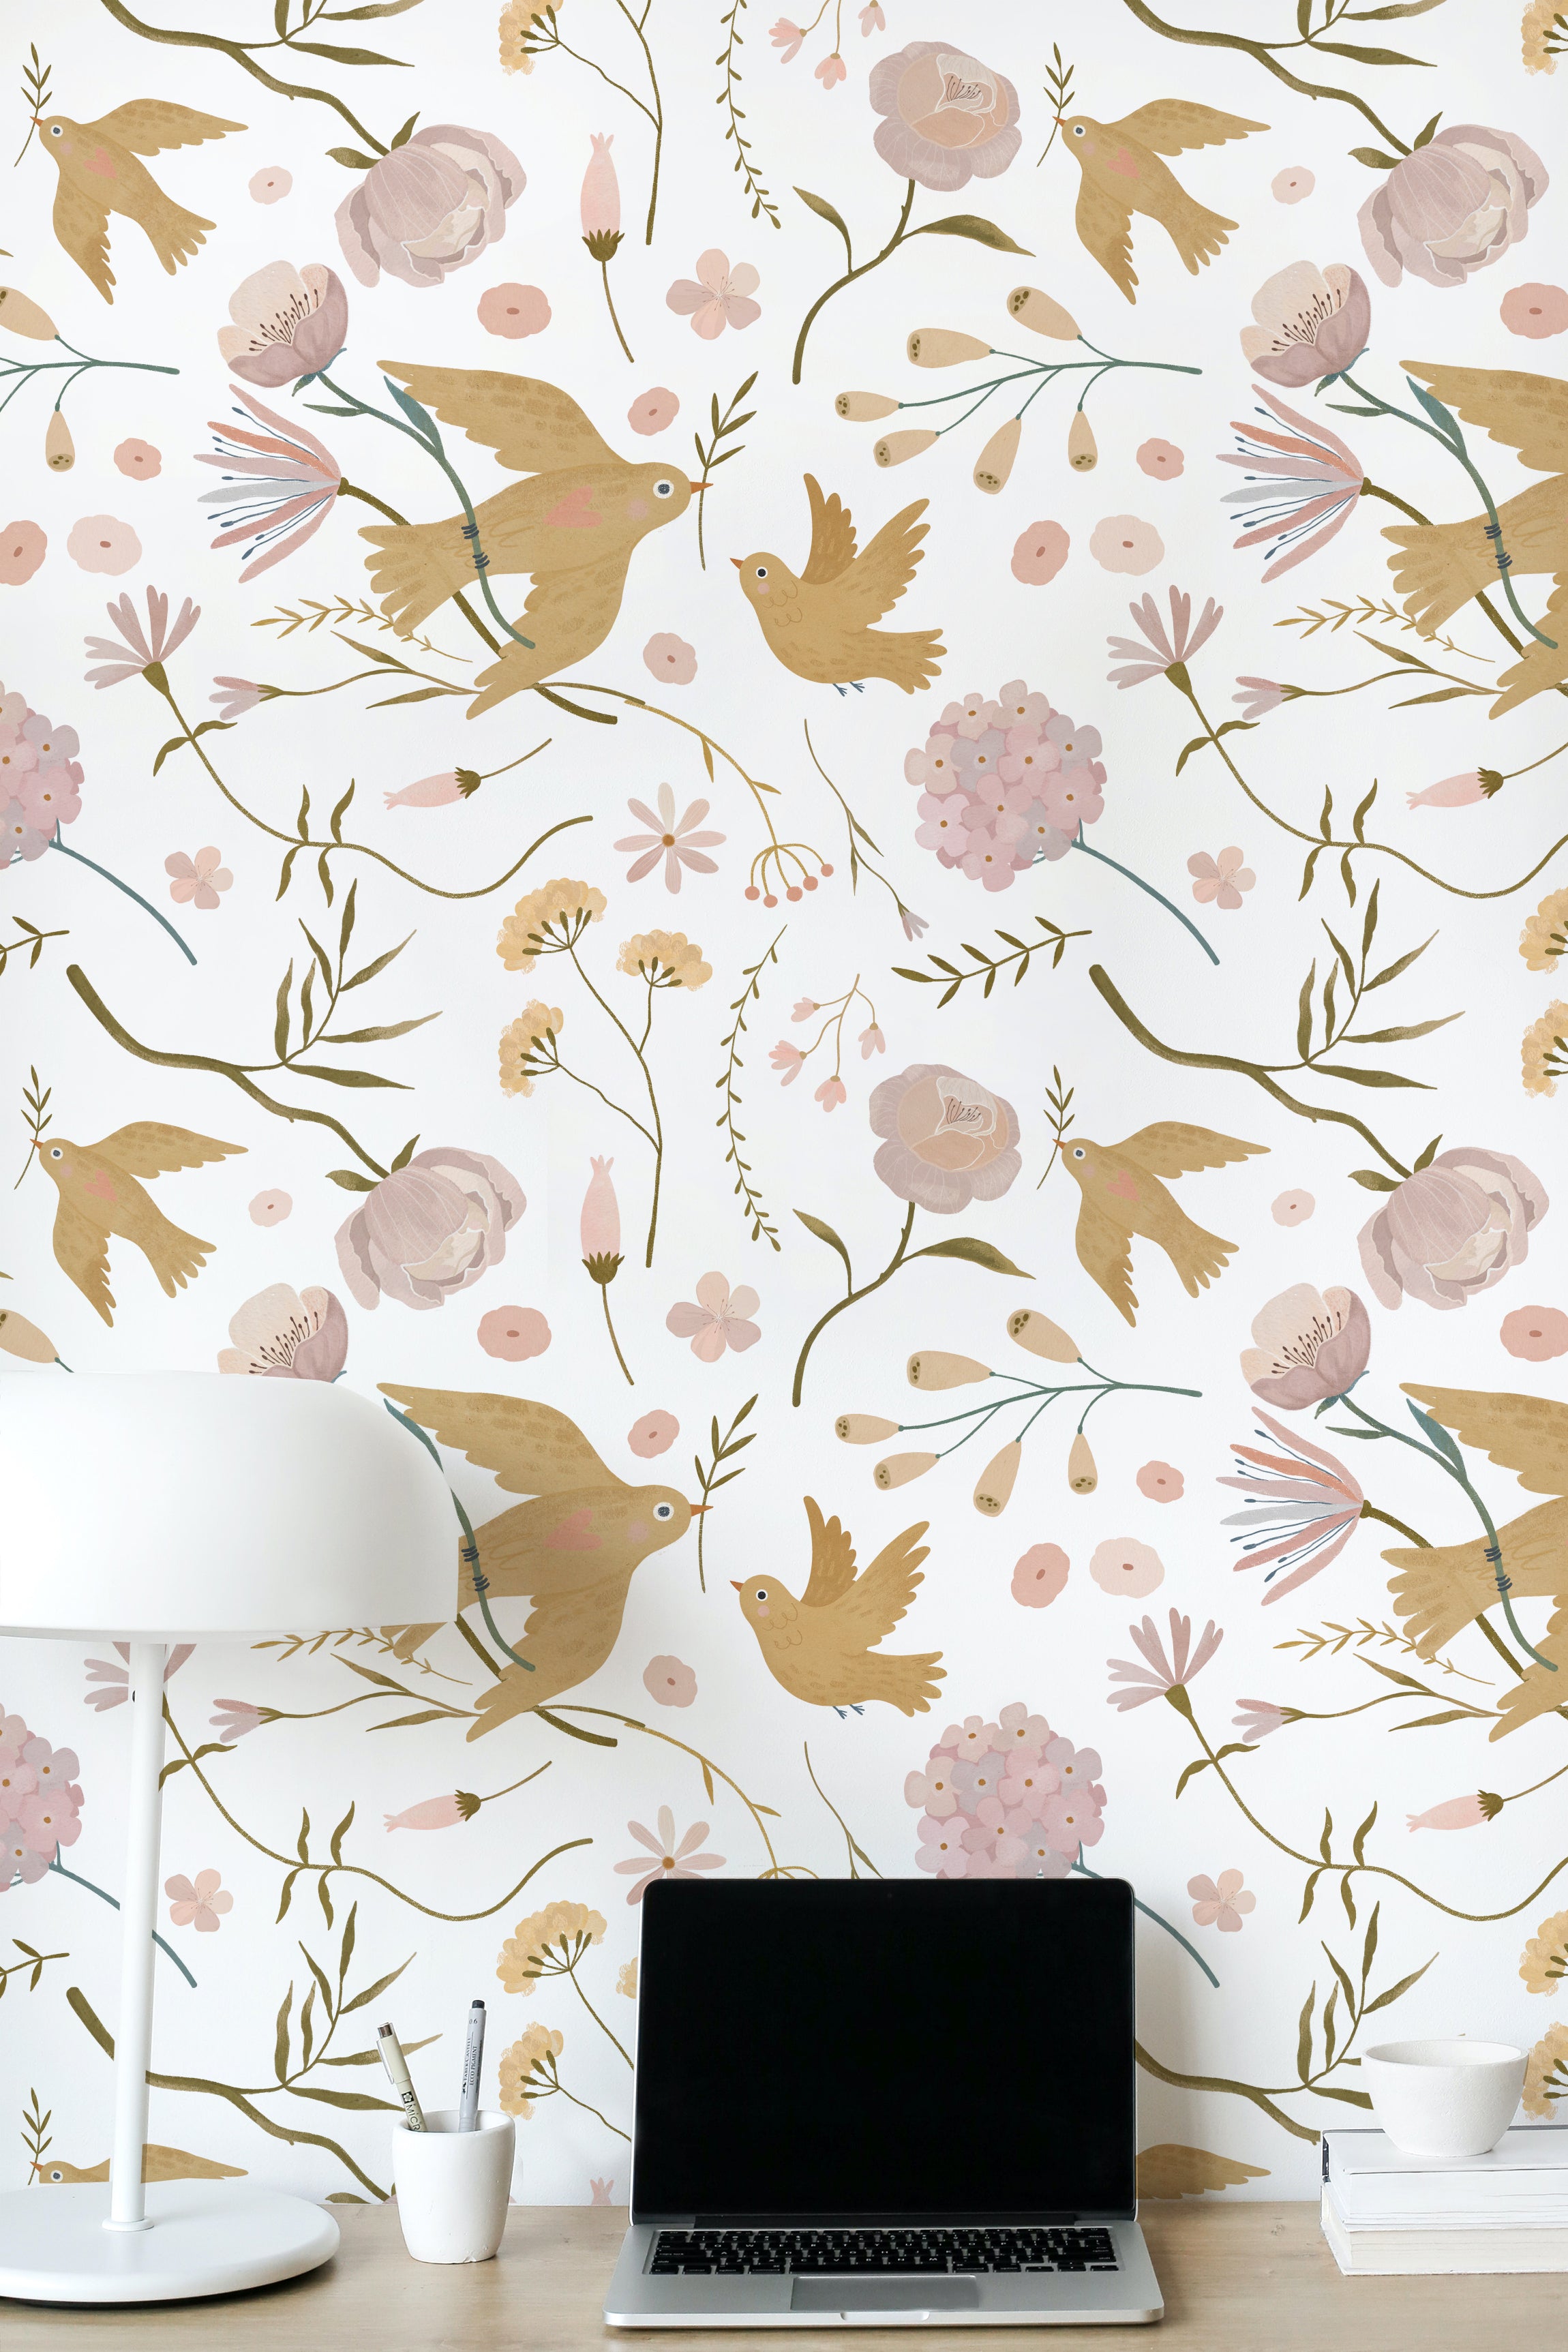 A home office space enhanced by the Pastel Garden Wallpaper, featuring charming illustrations of birds and botanicals in soft pastel tones. The floral and avian elements create a lively yet serene work environment.